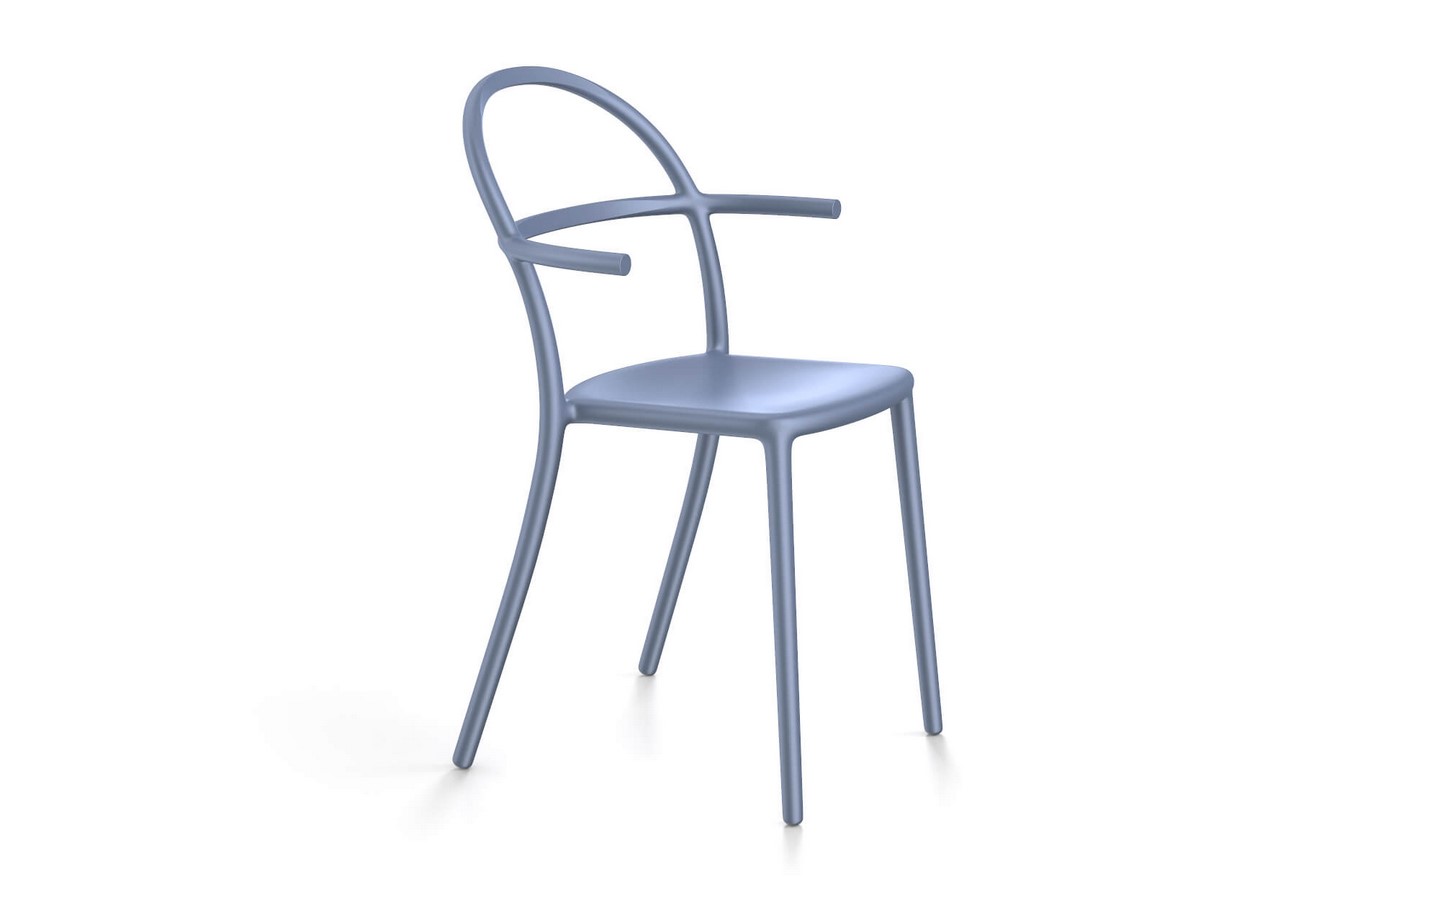 GENERIC.C, was designed by Philippe Starck with A. Maggiar for Kartell - Sheet1